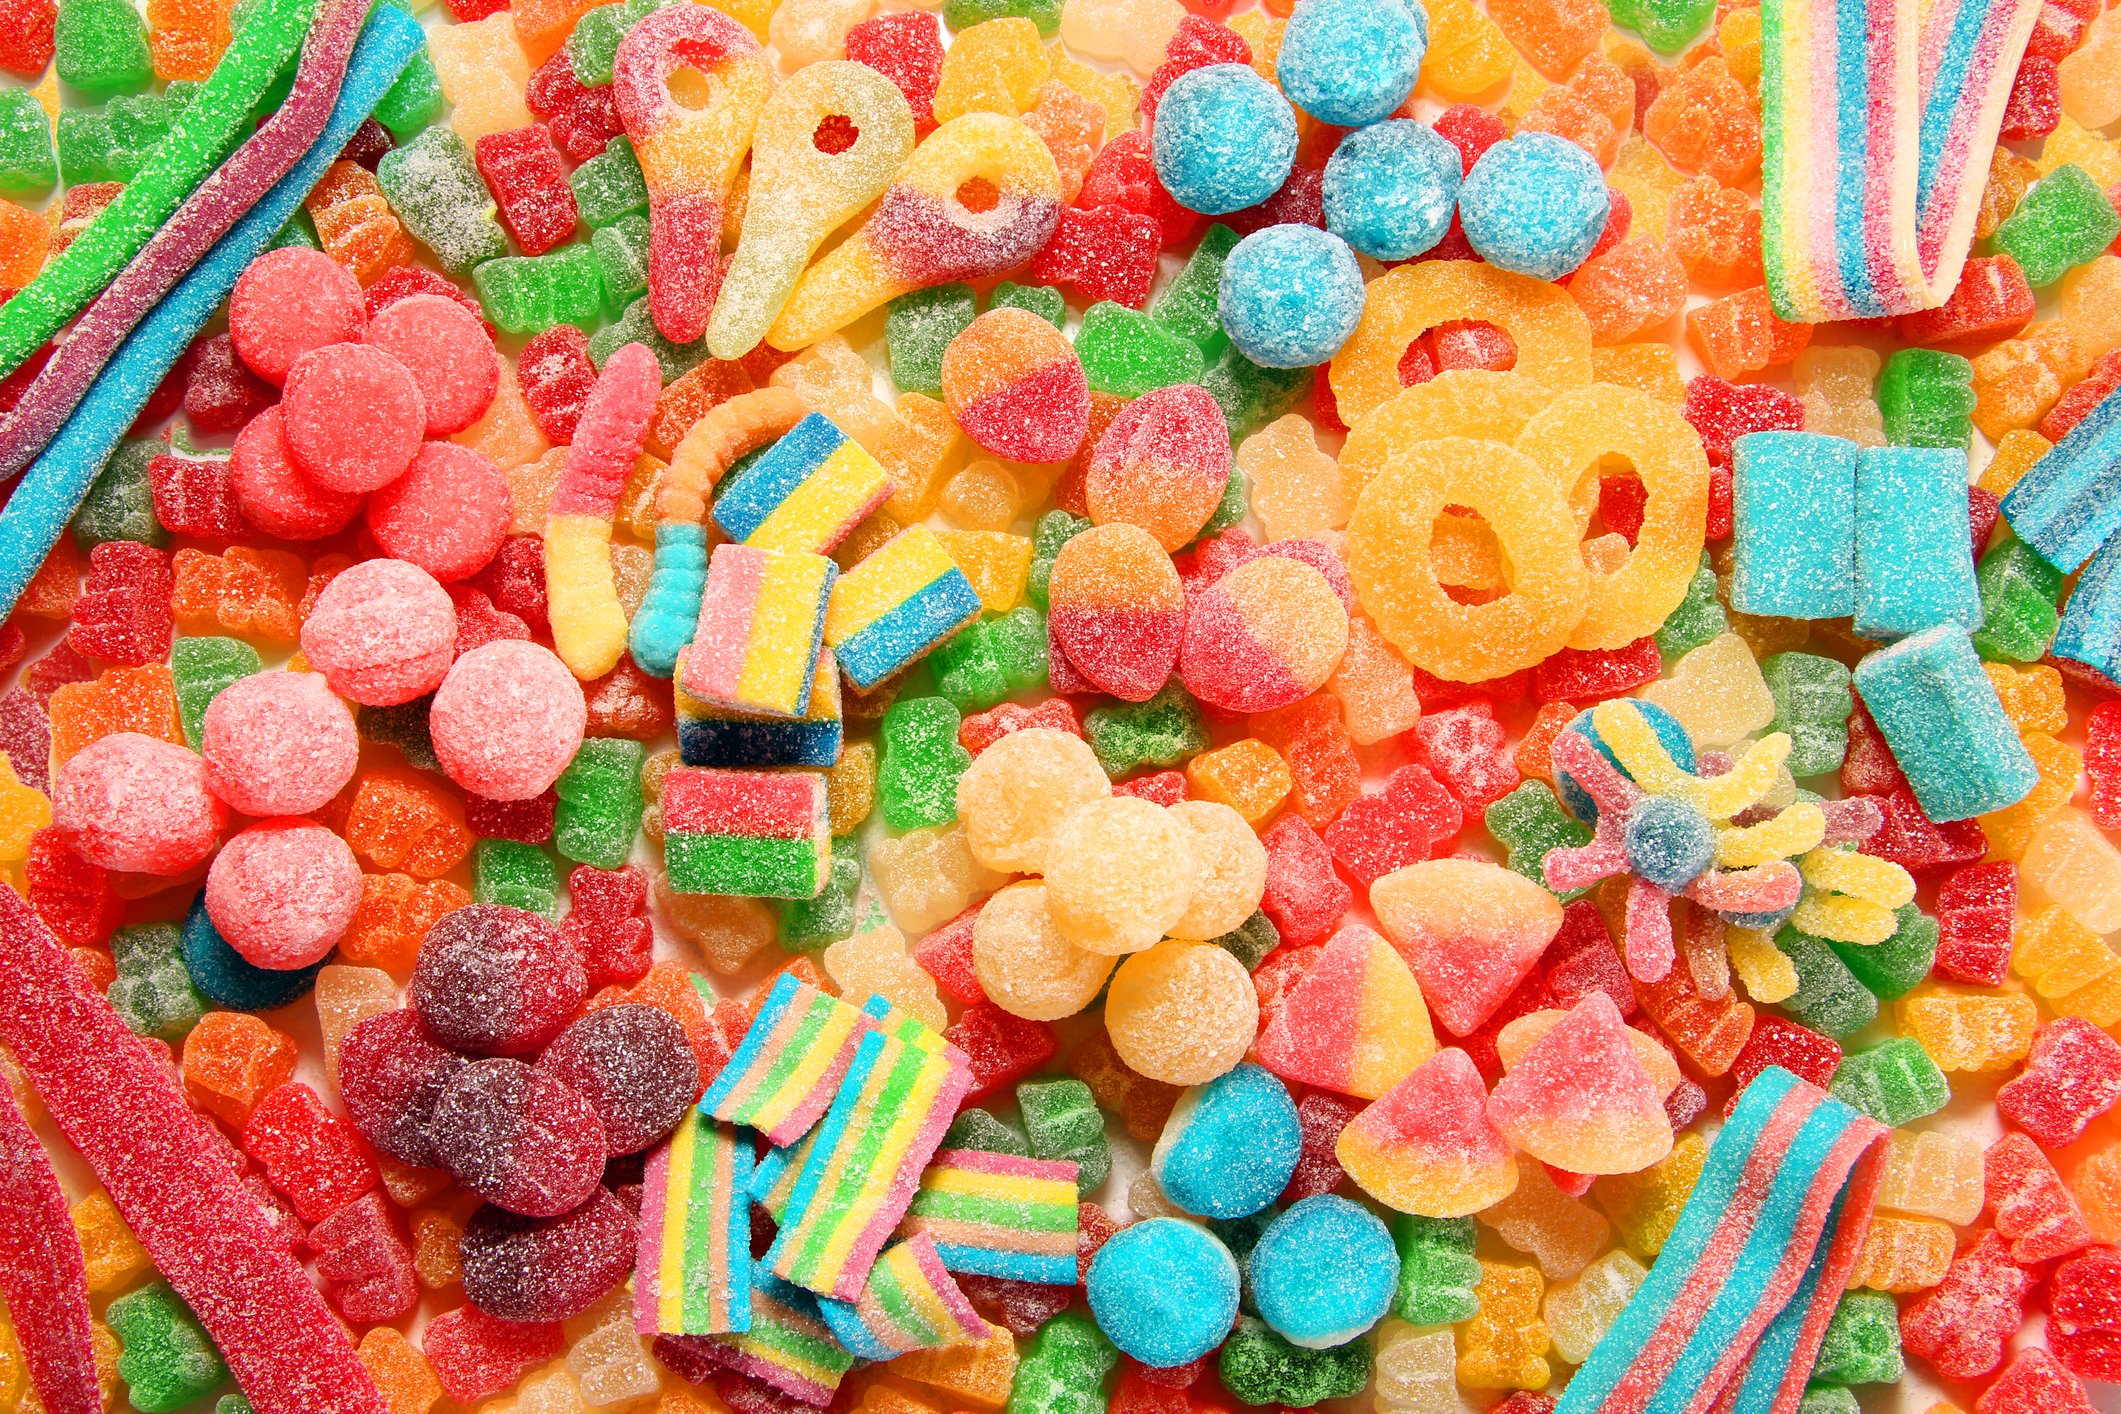 Assorted variety of sour candies includes extreme sour soft fruit chews, keys, tart candy belts and straws. (Photo: iStock - HannamariaH)